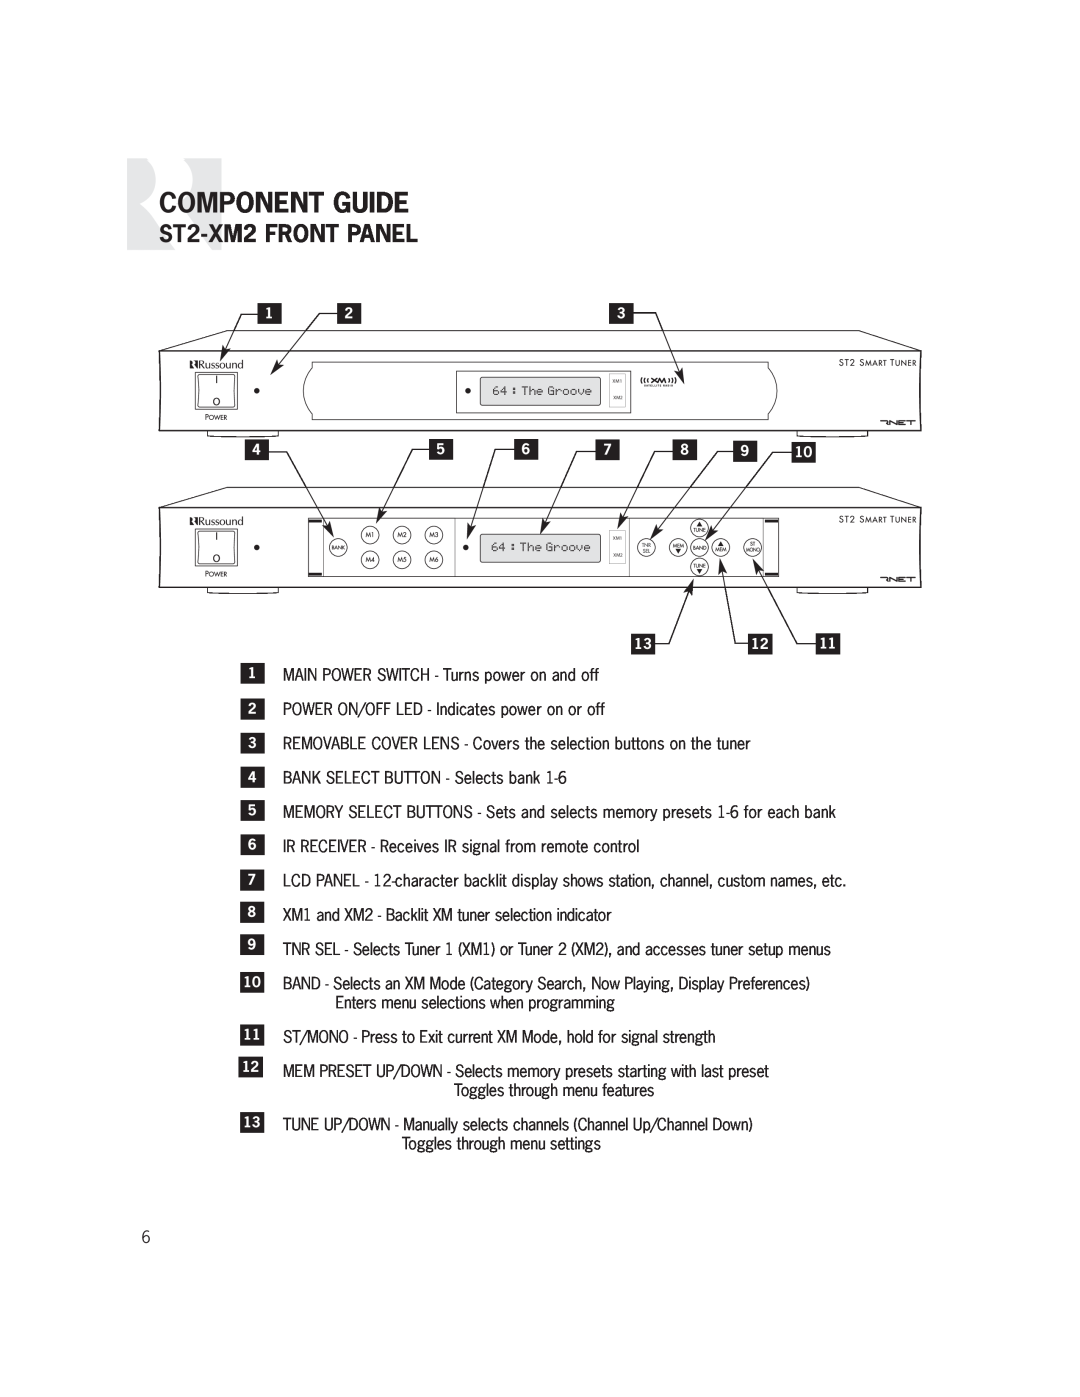 Russound manual Component Guide, ST2-XM2FRONT PANEL 